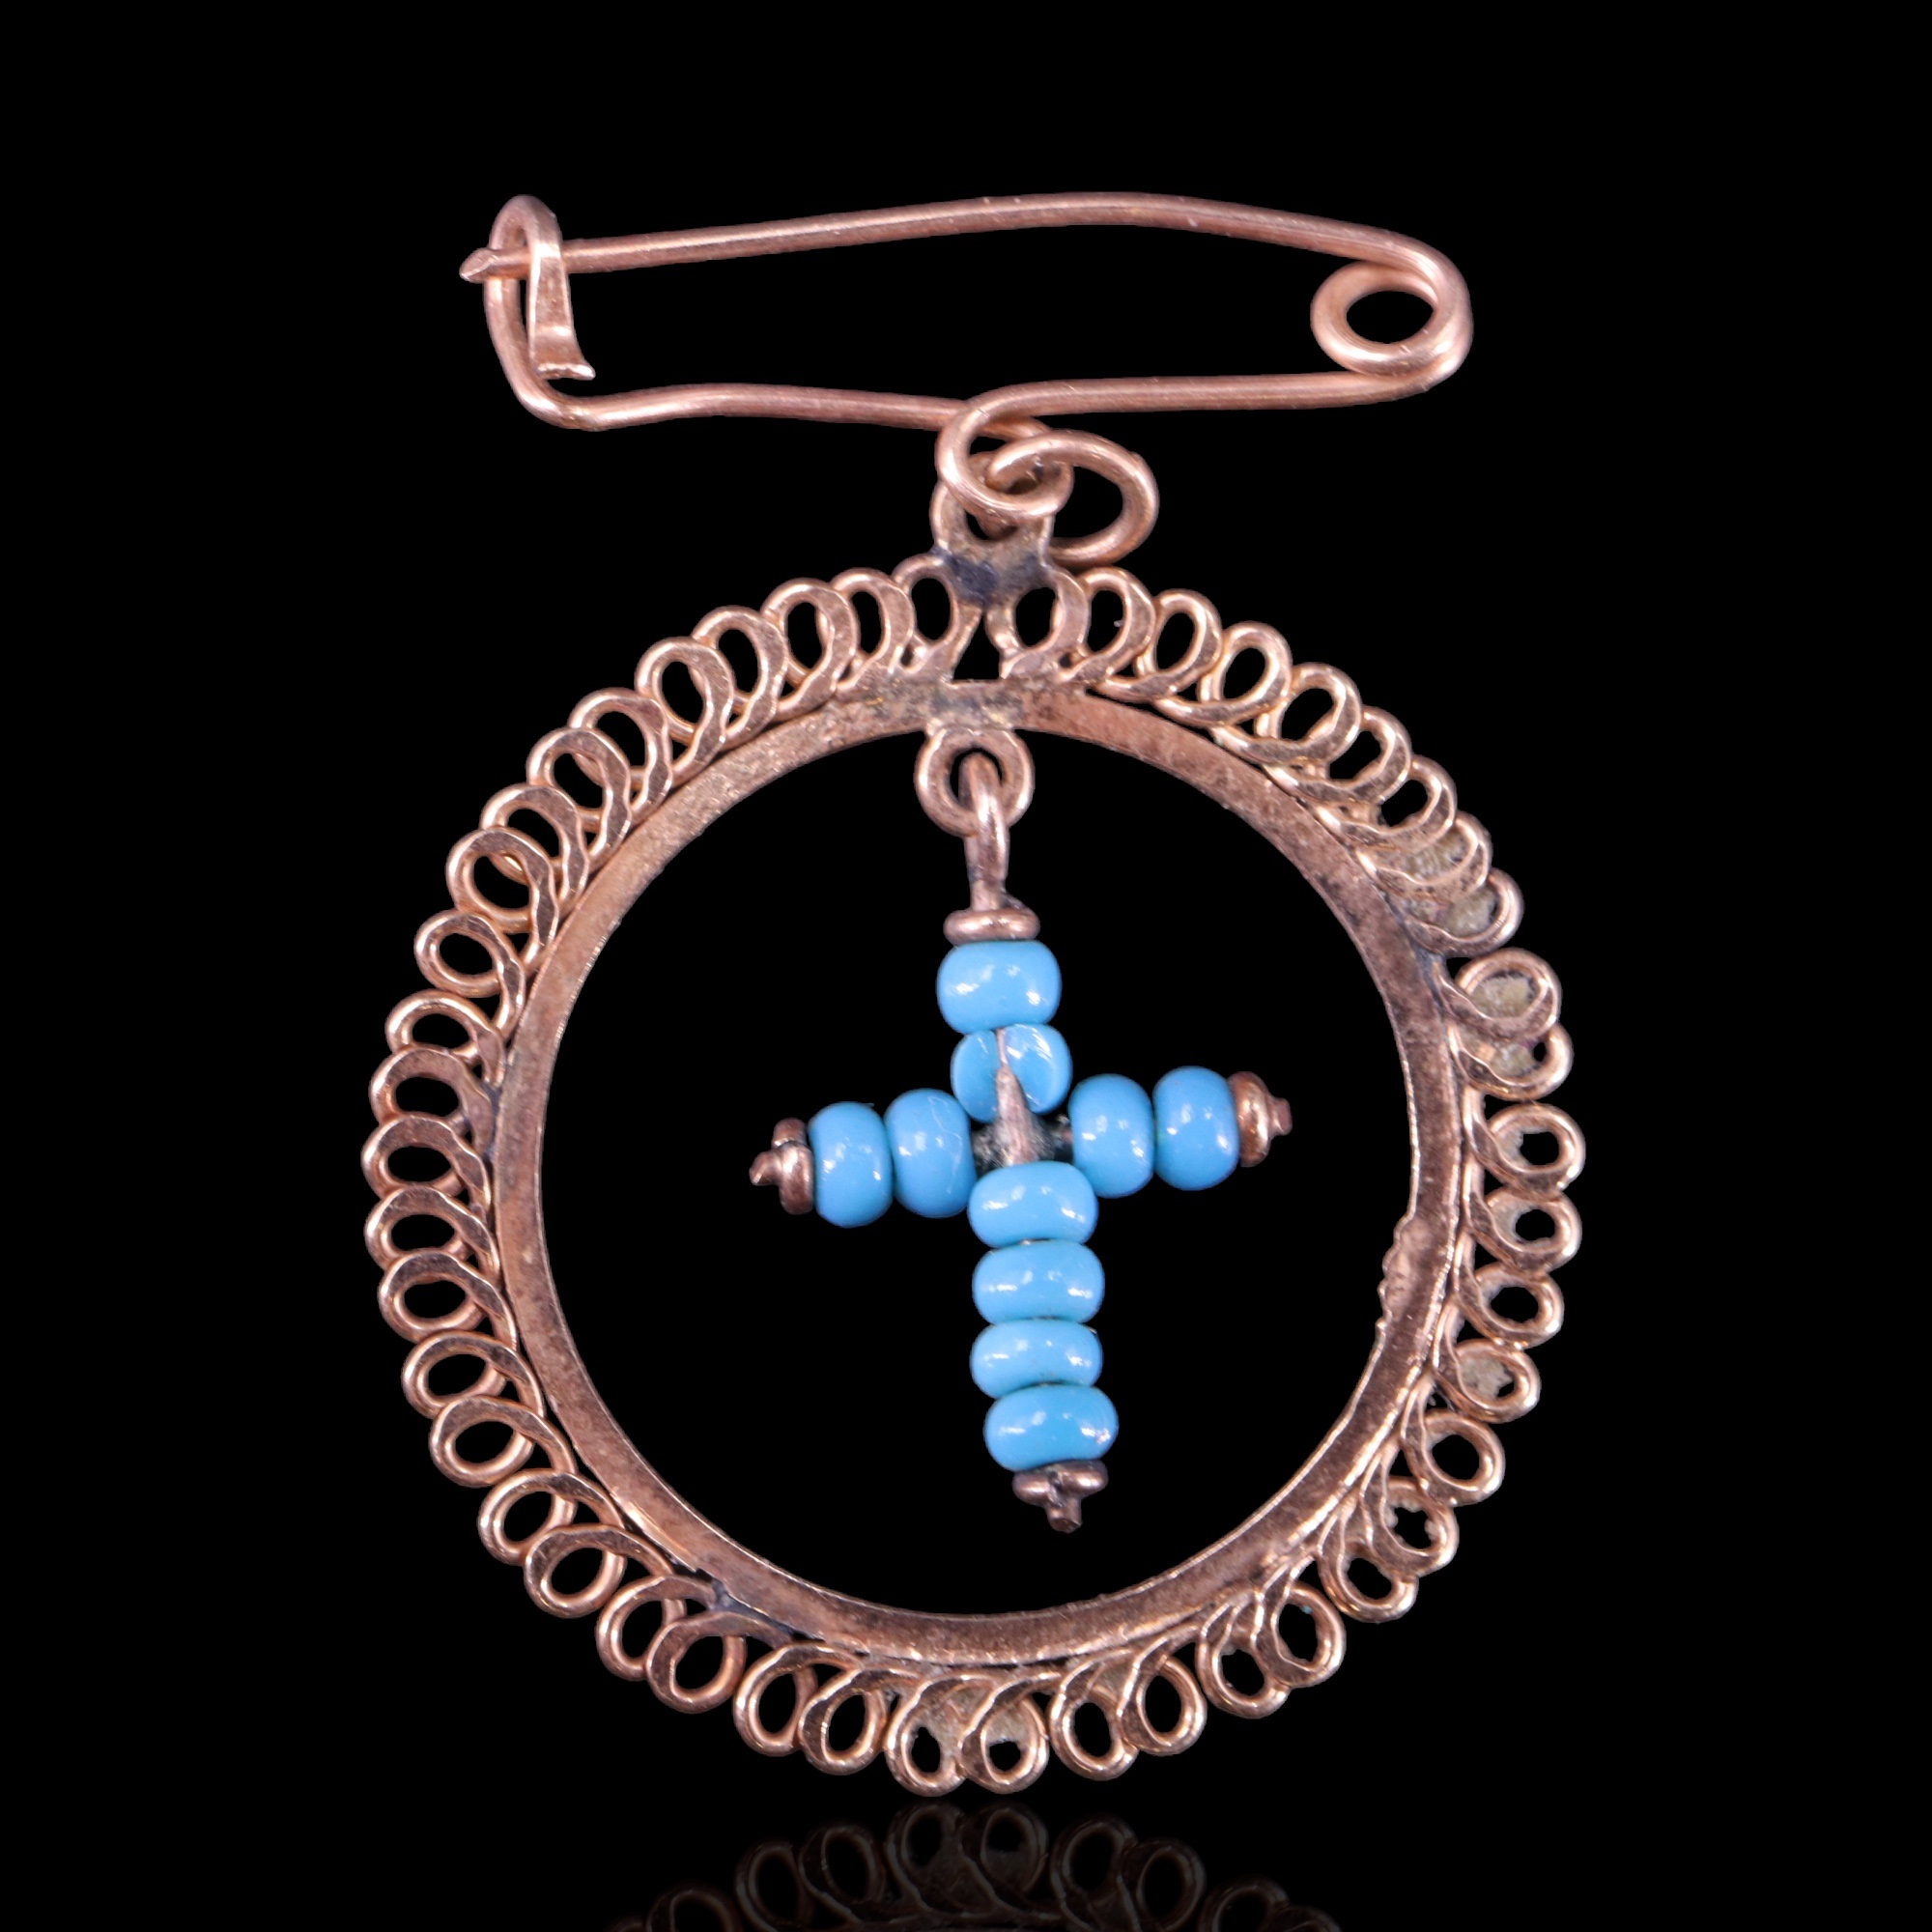 A yellow metal and turquoise-coloured bead articulated brooch, being a bead cross pendant within